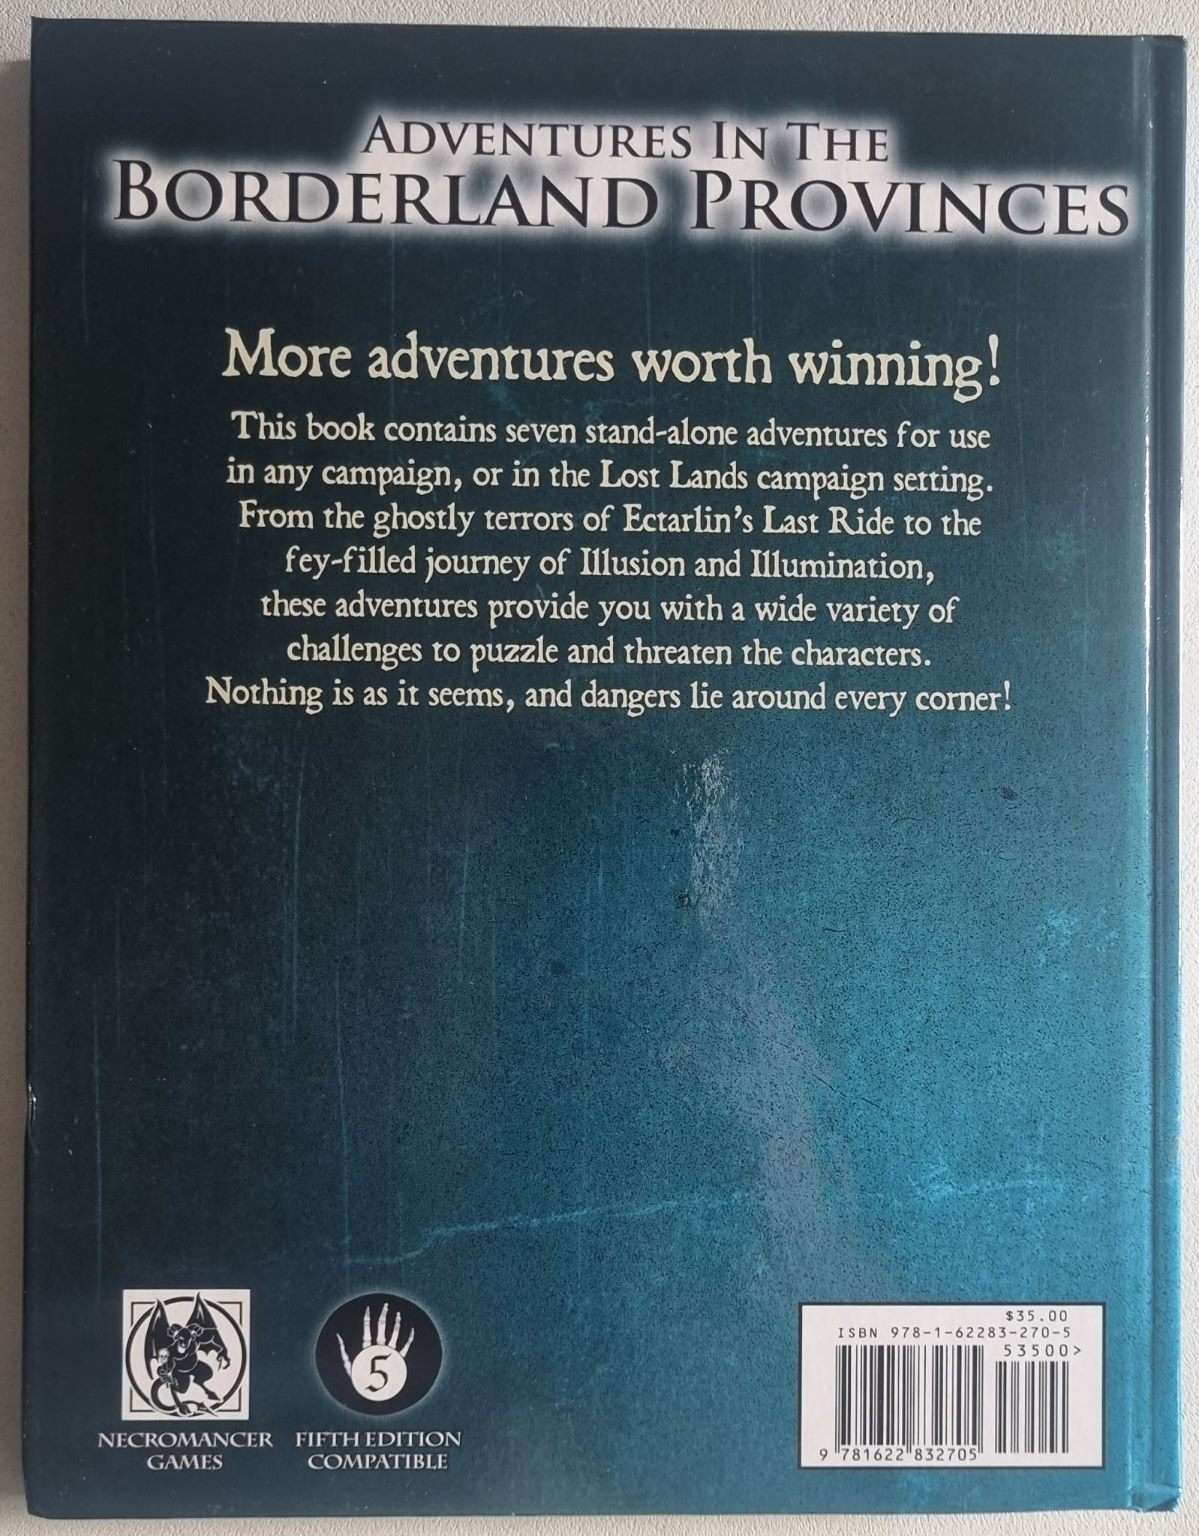 The Lost Lands: Adventures in the Borderland Provinces - D&D 5th Ed